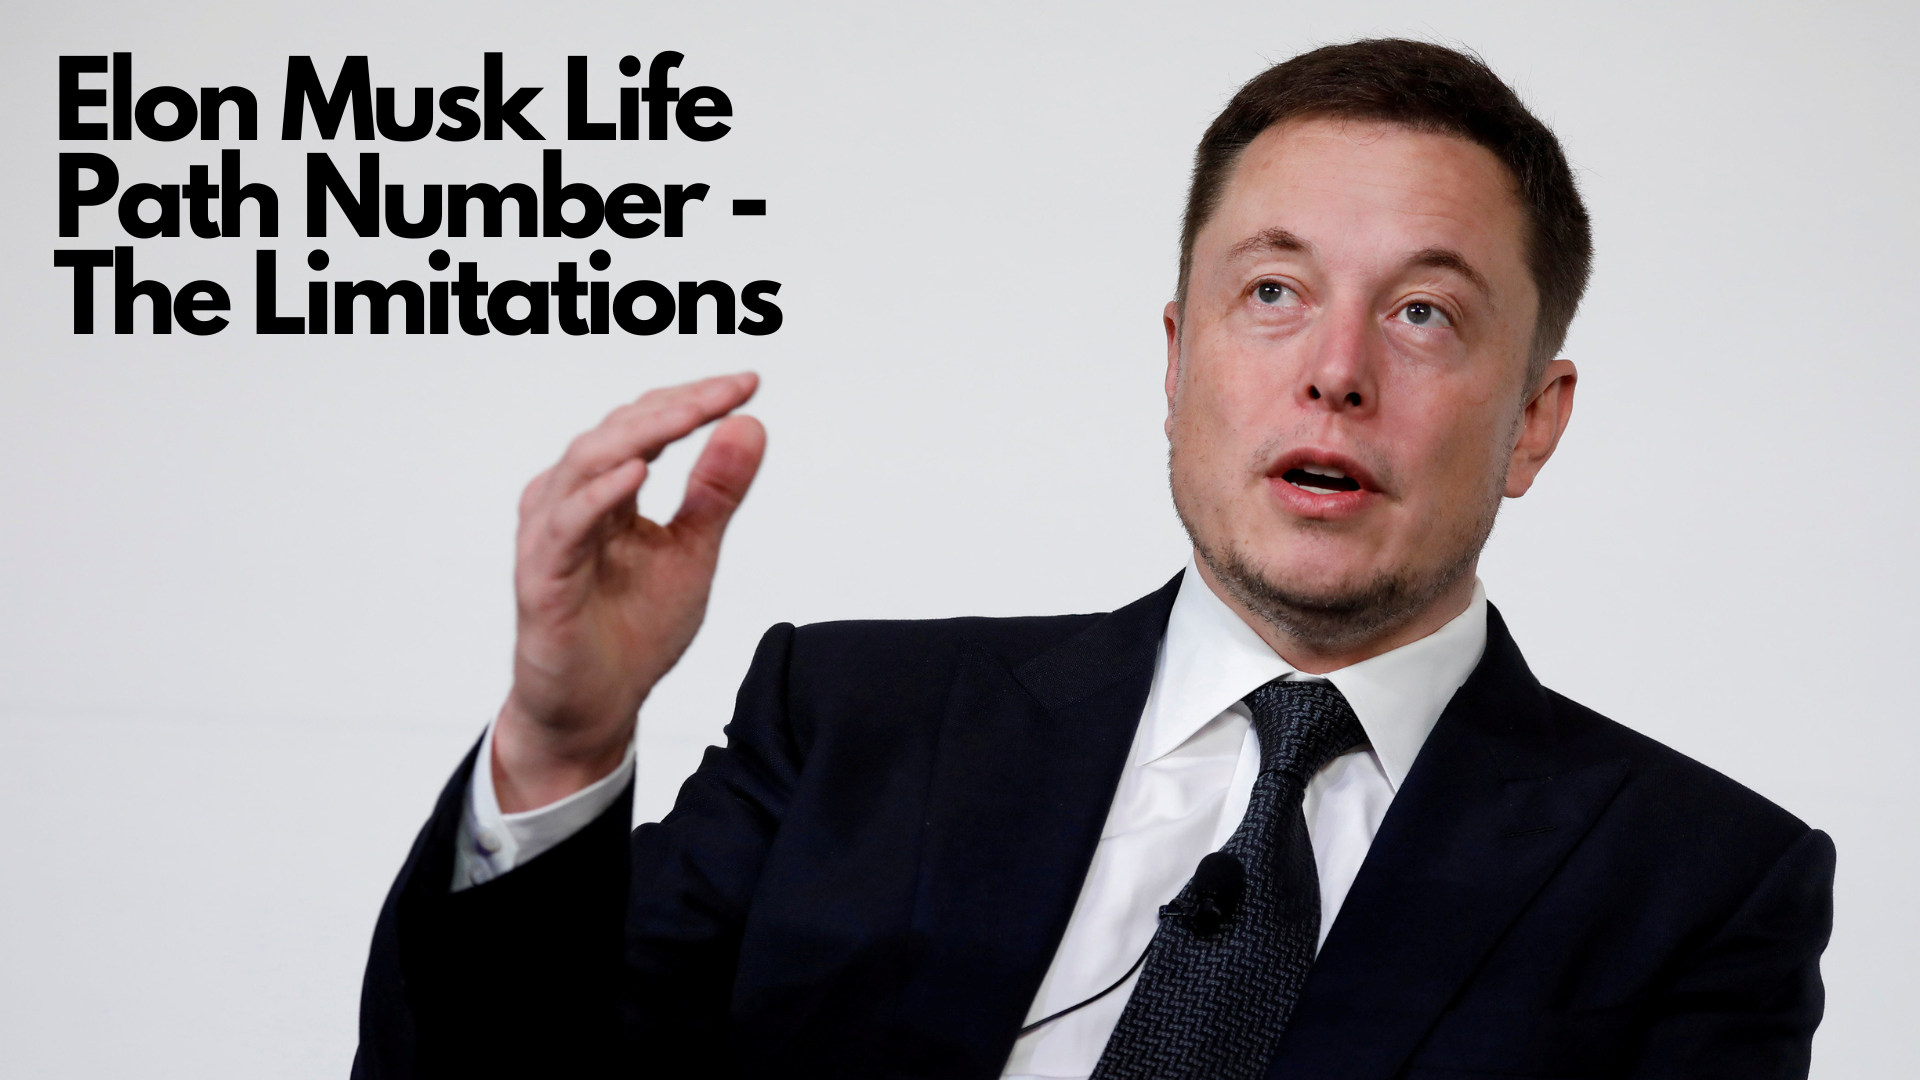 Elon Musk talking while sitting with words Elon Musk Life Path Number The Limitations